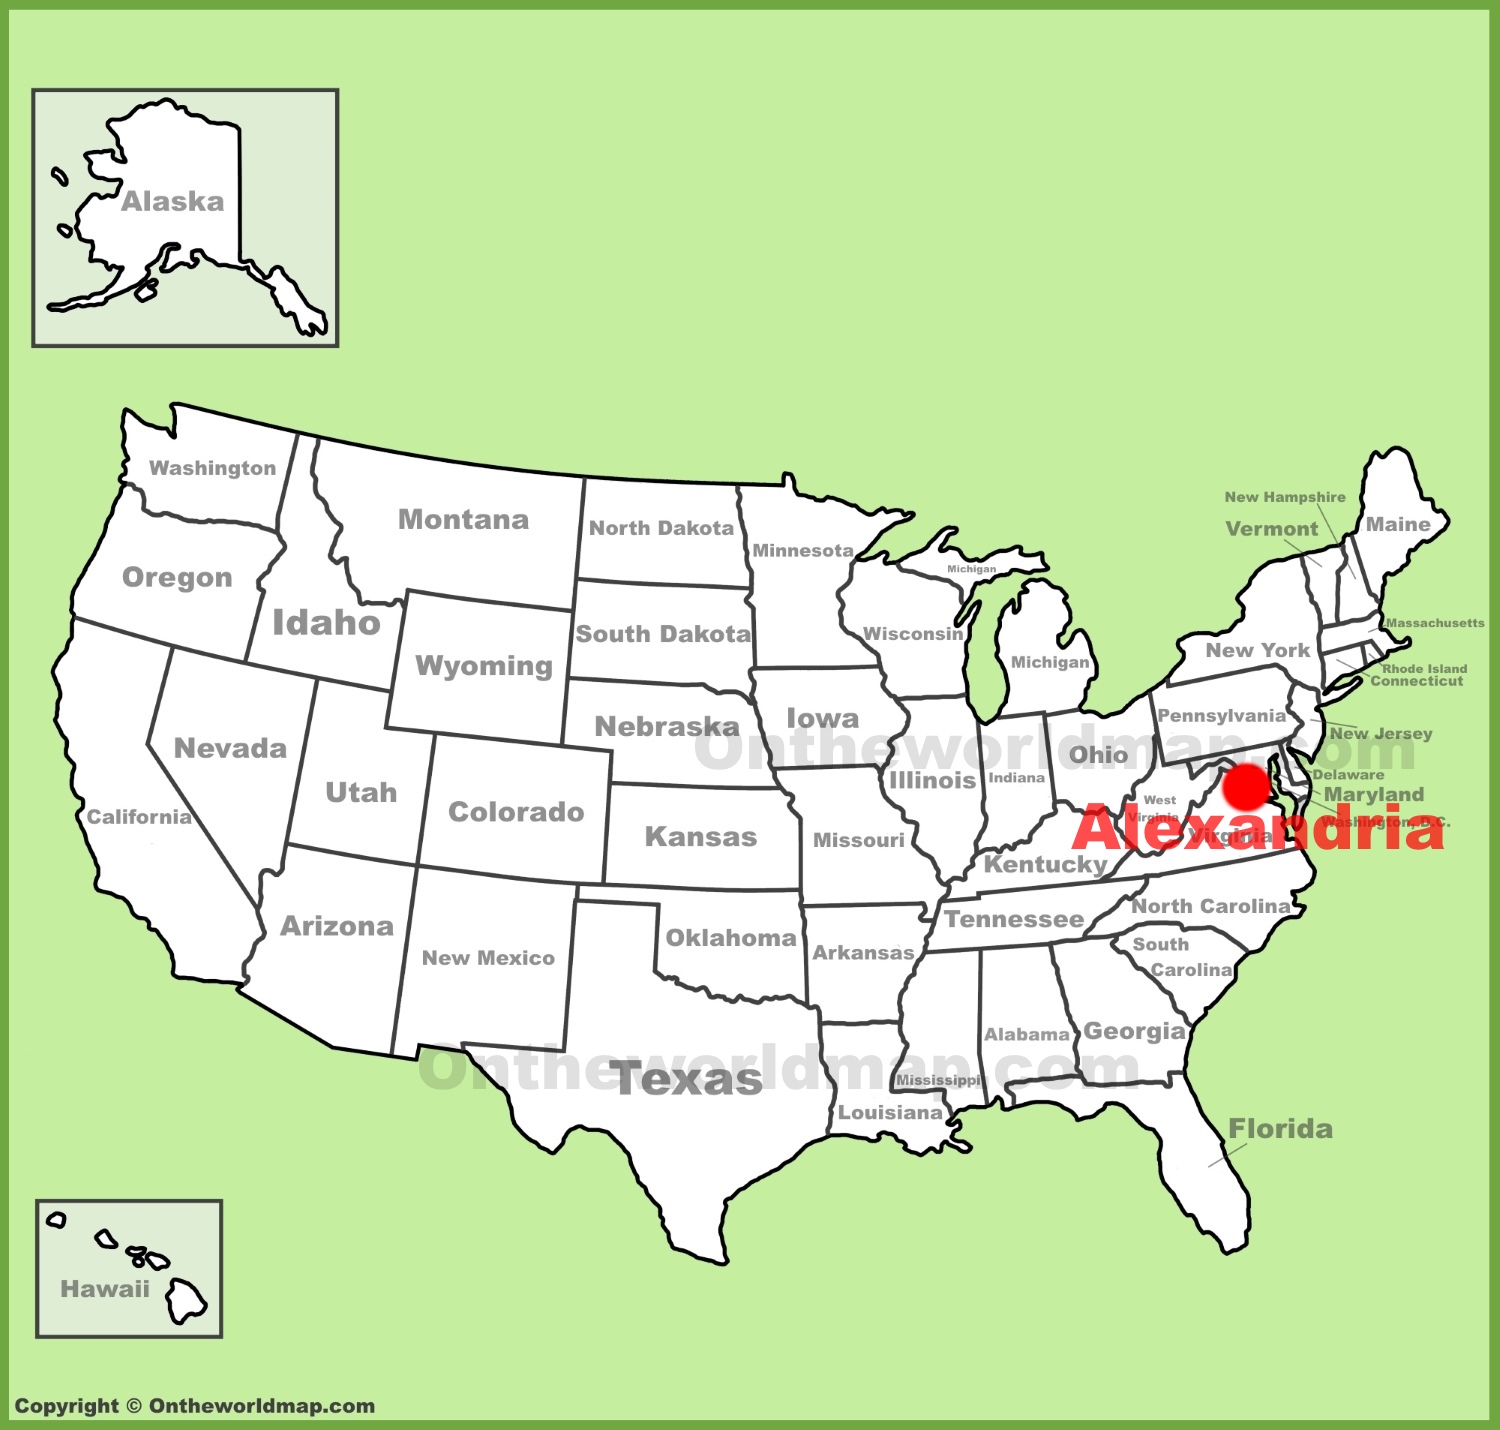 Alexandria Location On The Us Map 